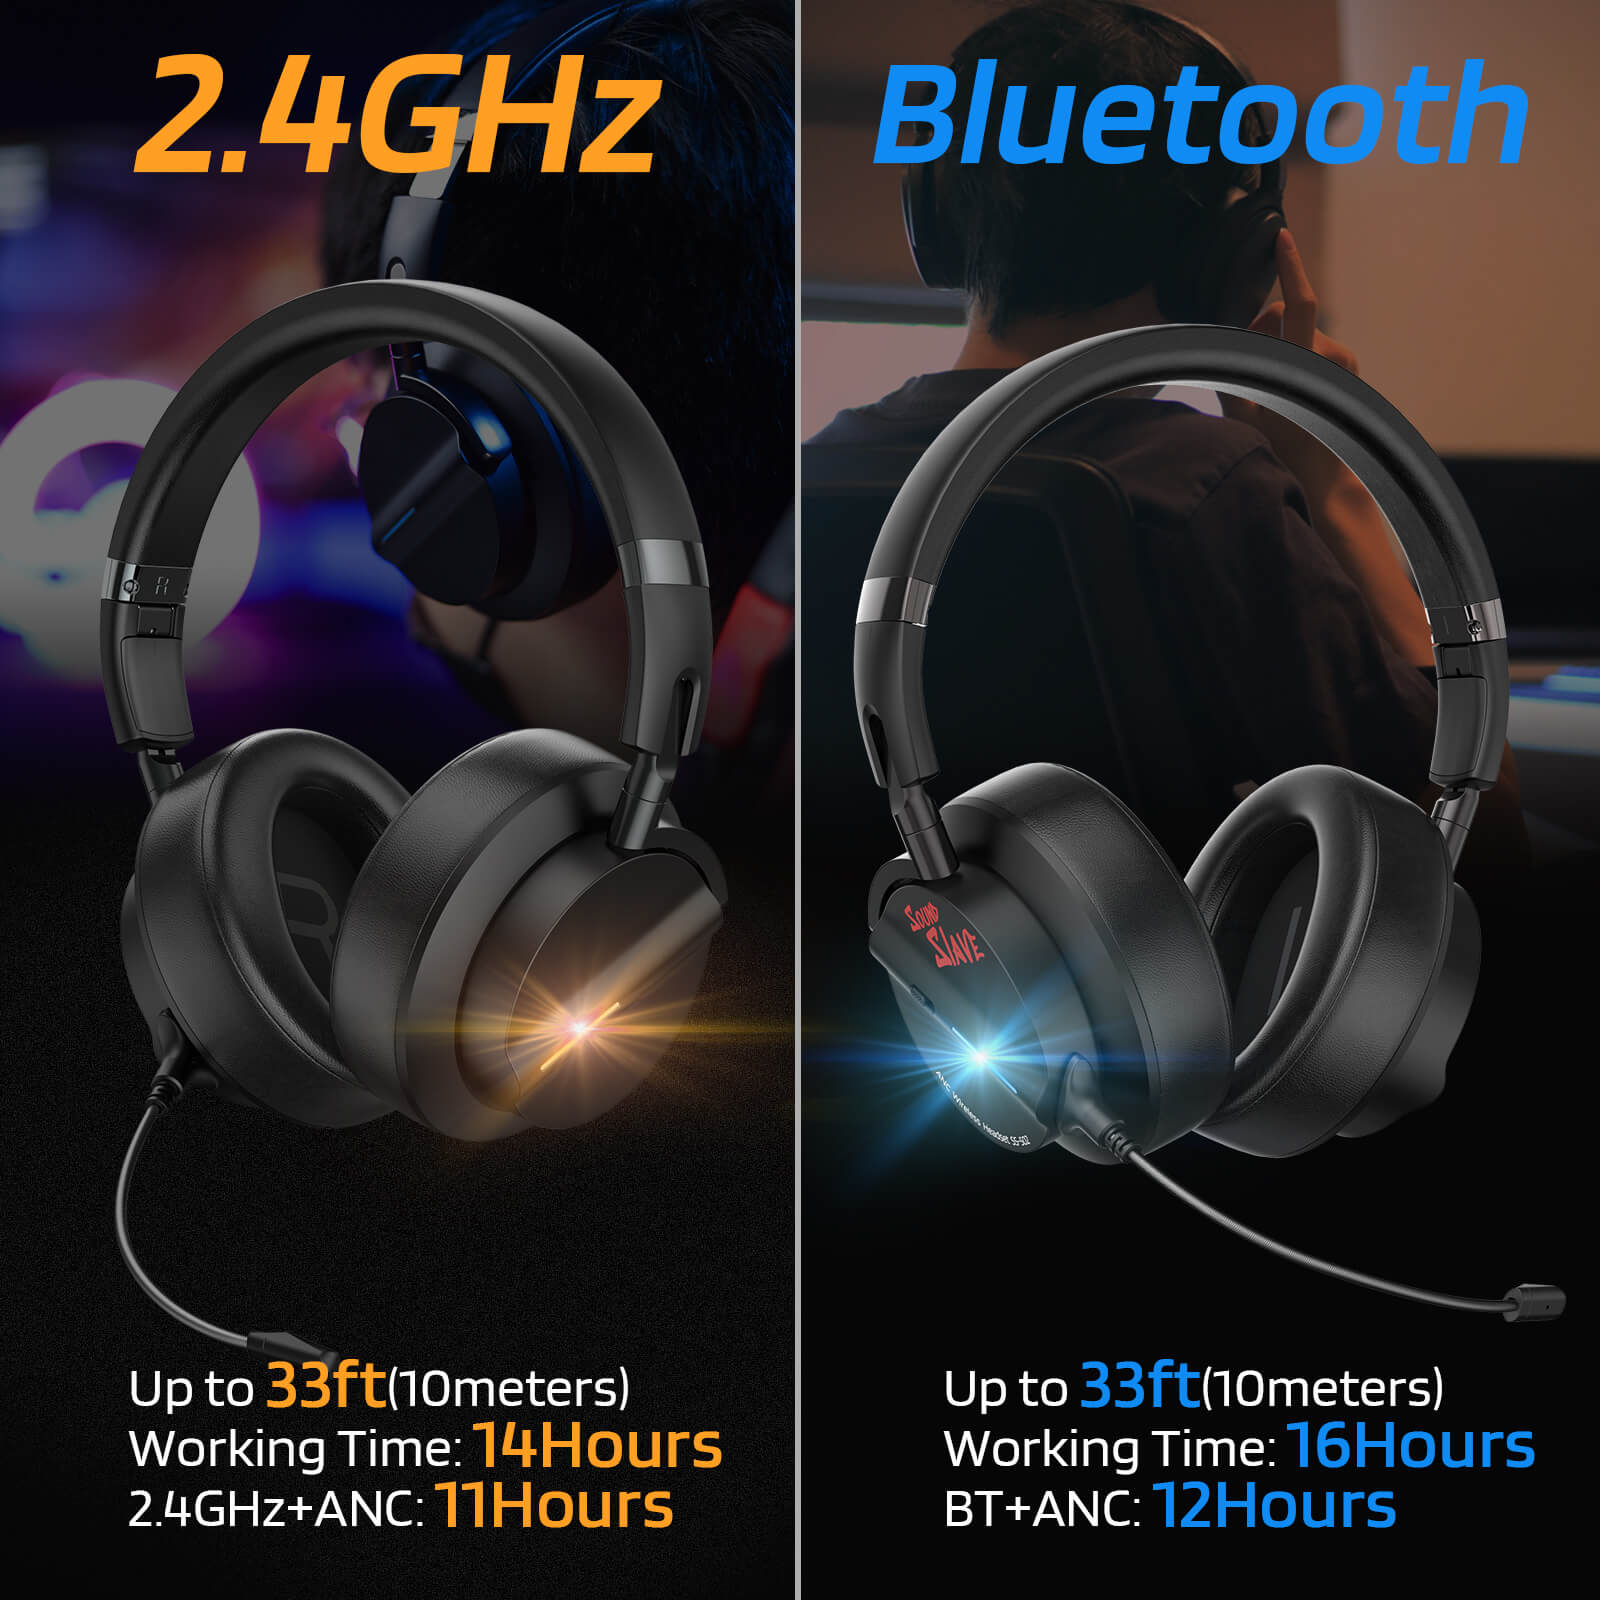 Redragon x with LTC Wireless Redragonshop Noise 2.4GHz/BT Headphones Mic Cancelling | –